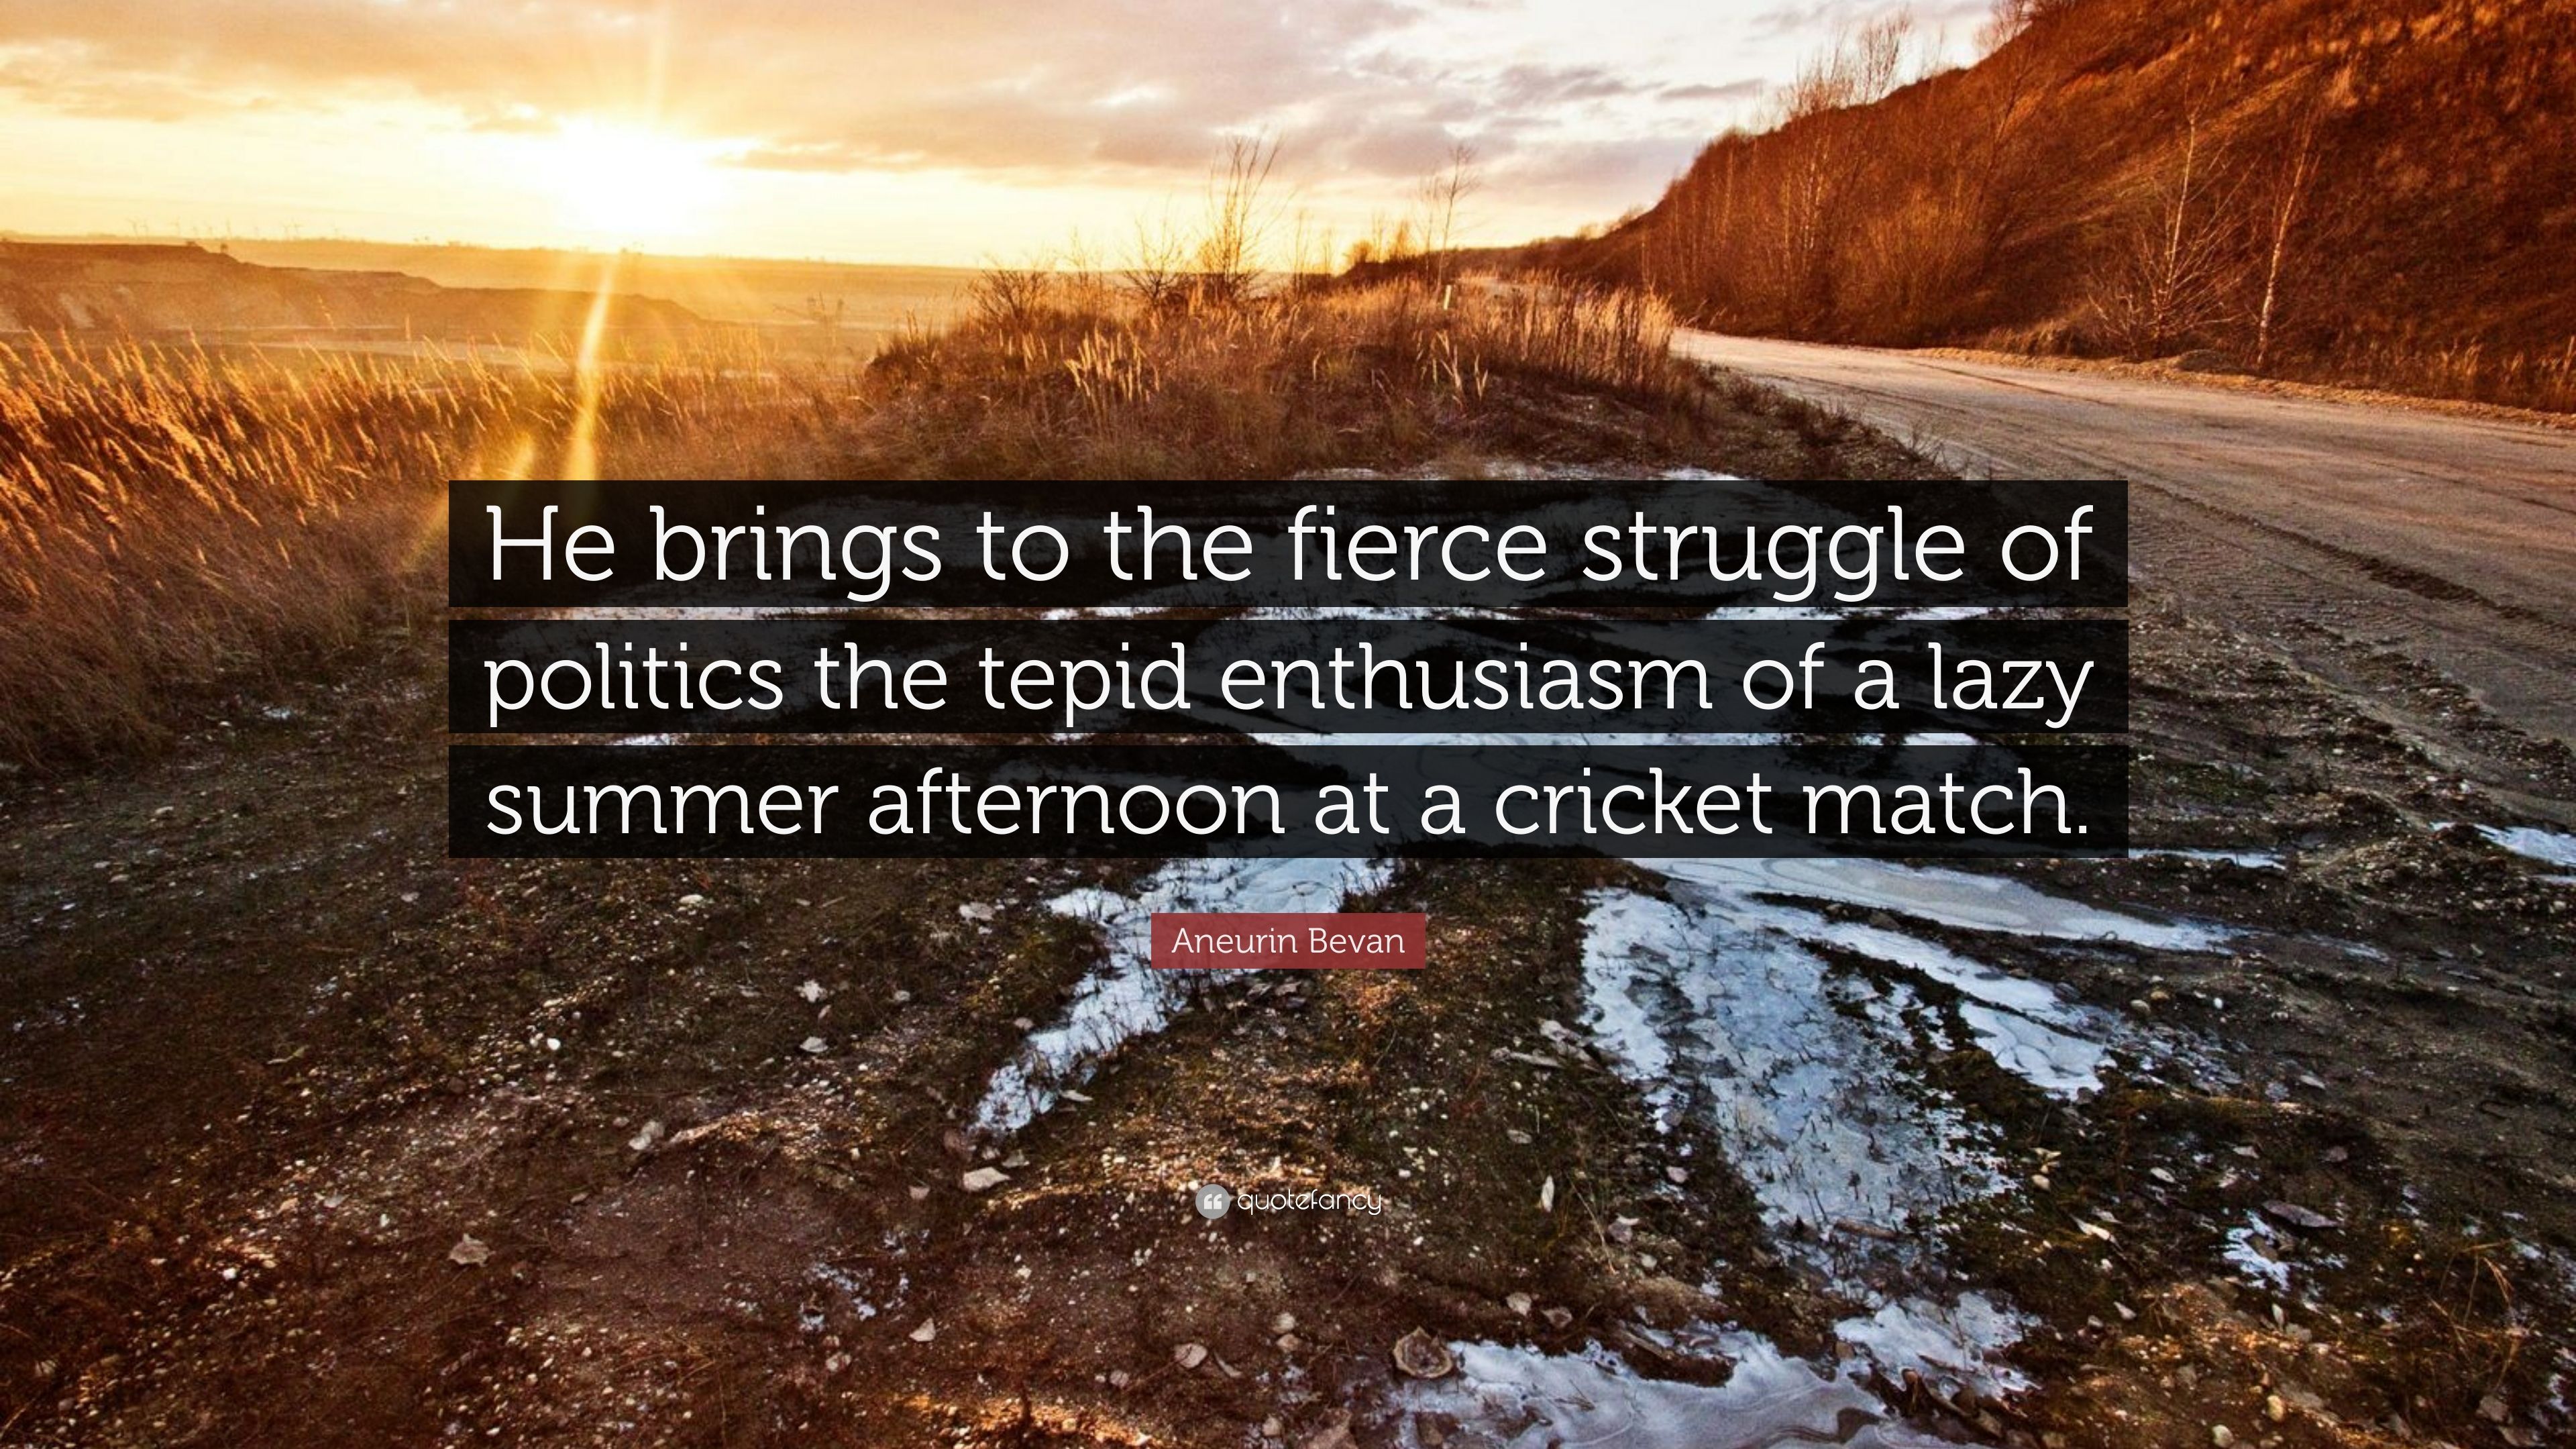 Aneurin Bevan Quote: “He brings to the fierce struggle of politics